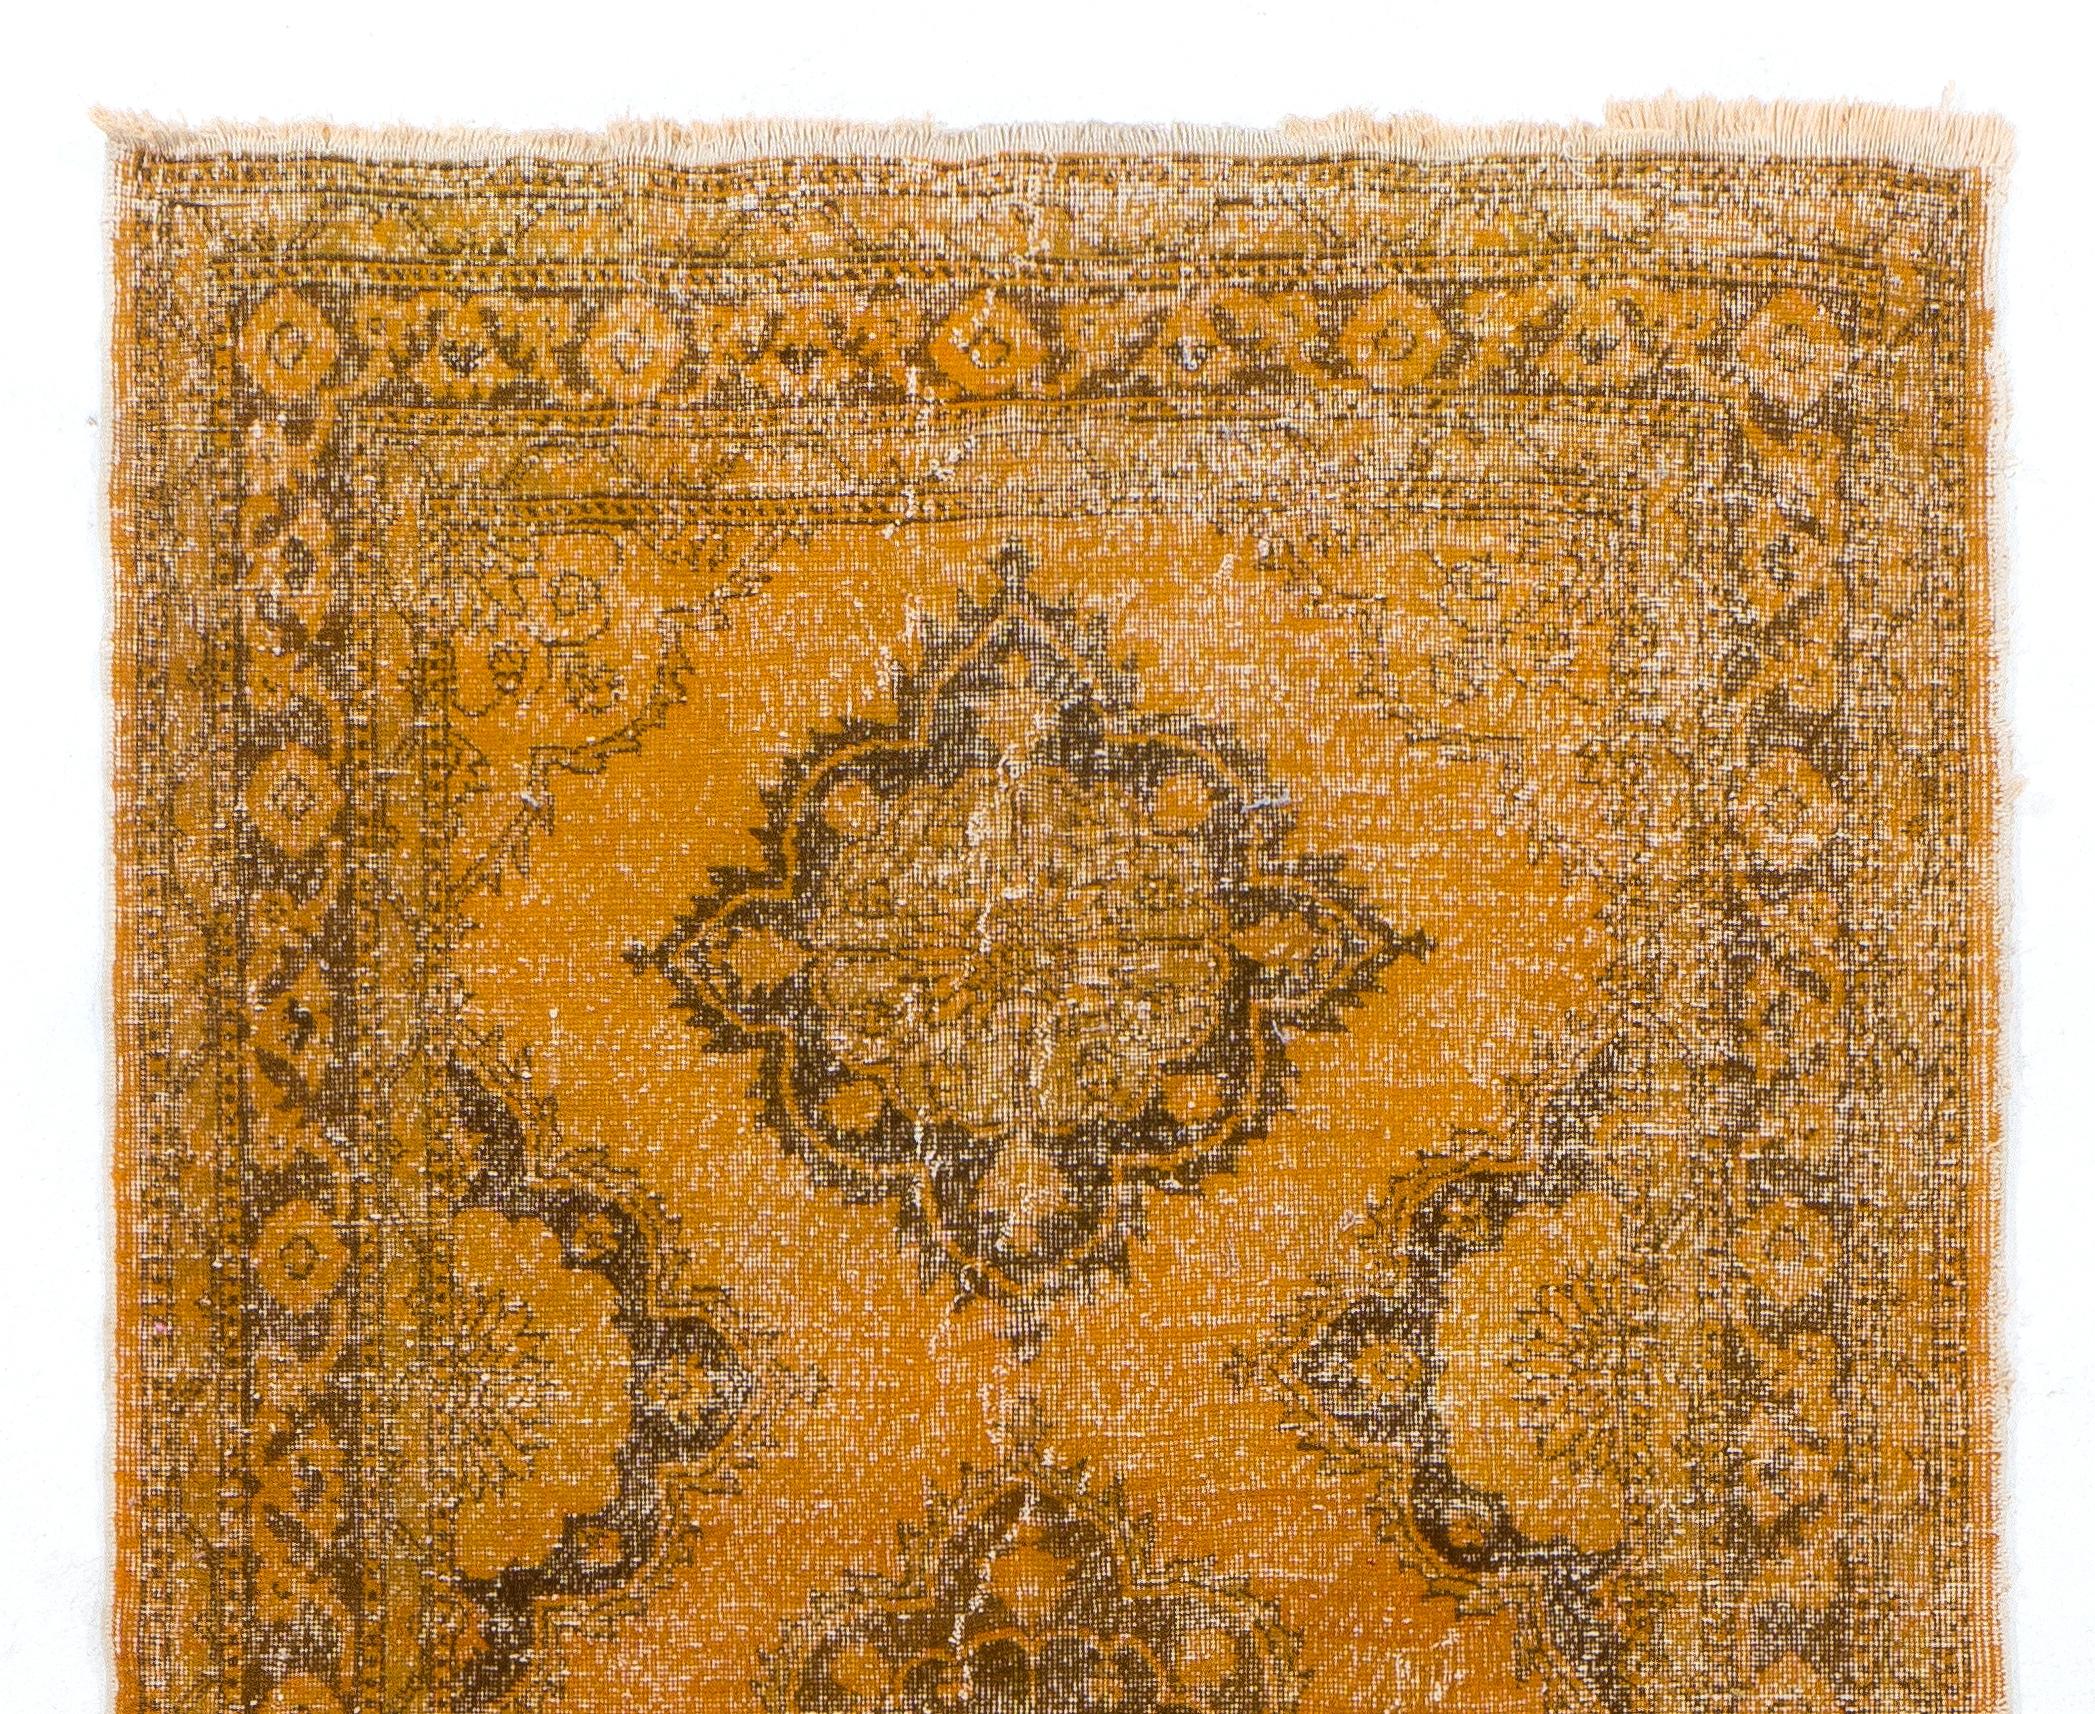 A vintage Turkish runner rug re-dyed in orange color. Great for contemporary interiors.
Finely hand knotted, low wool pile on cotton foundation. Professionally washed.
Sturdy and can be used on a high traffic area, suitable for both residential and